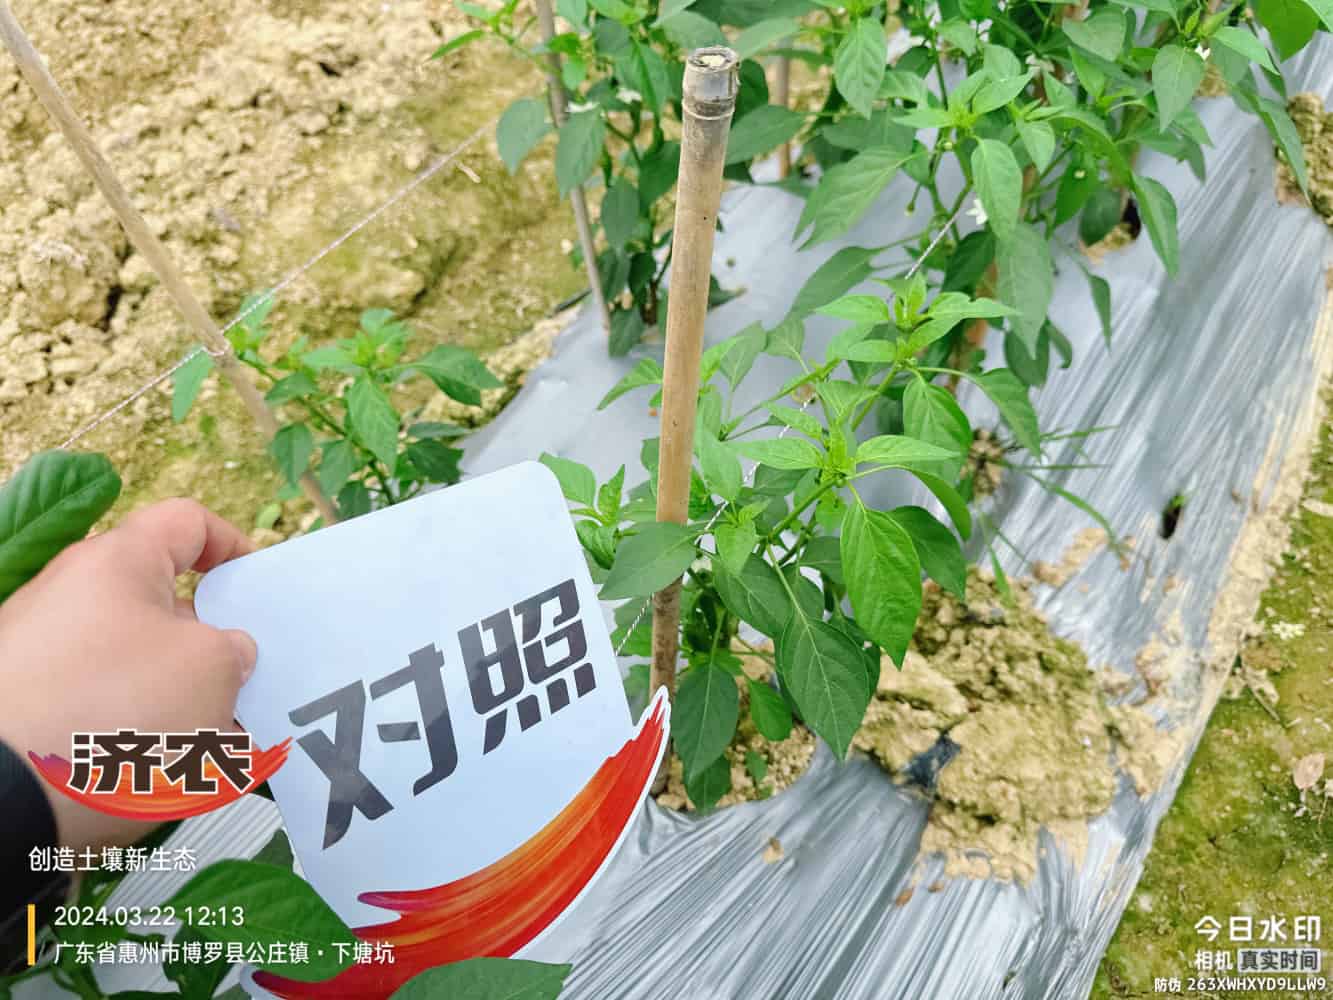 The effect of using agricultural products in Guangdong chili peppers(图6)